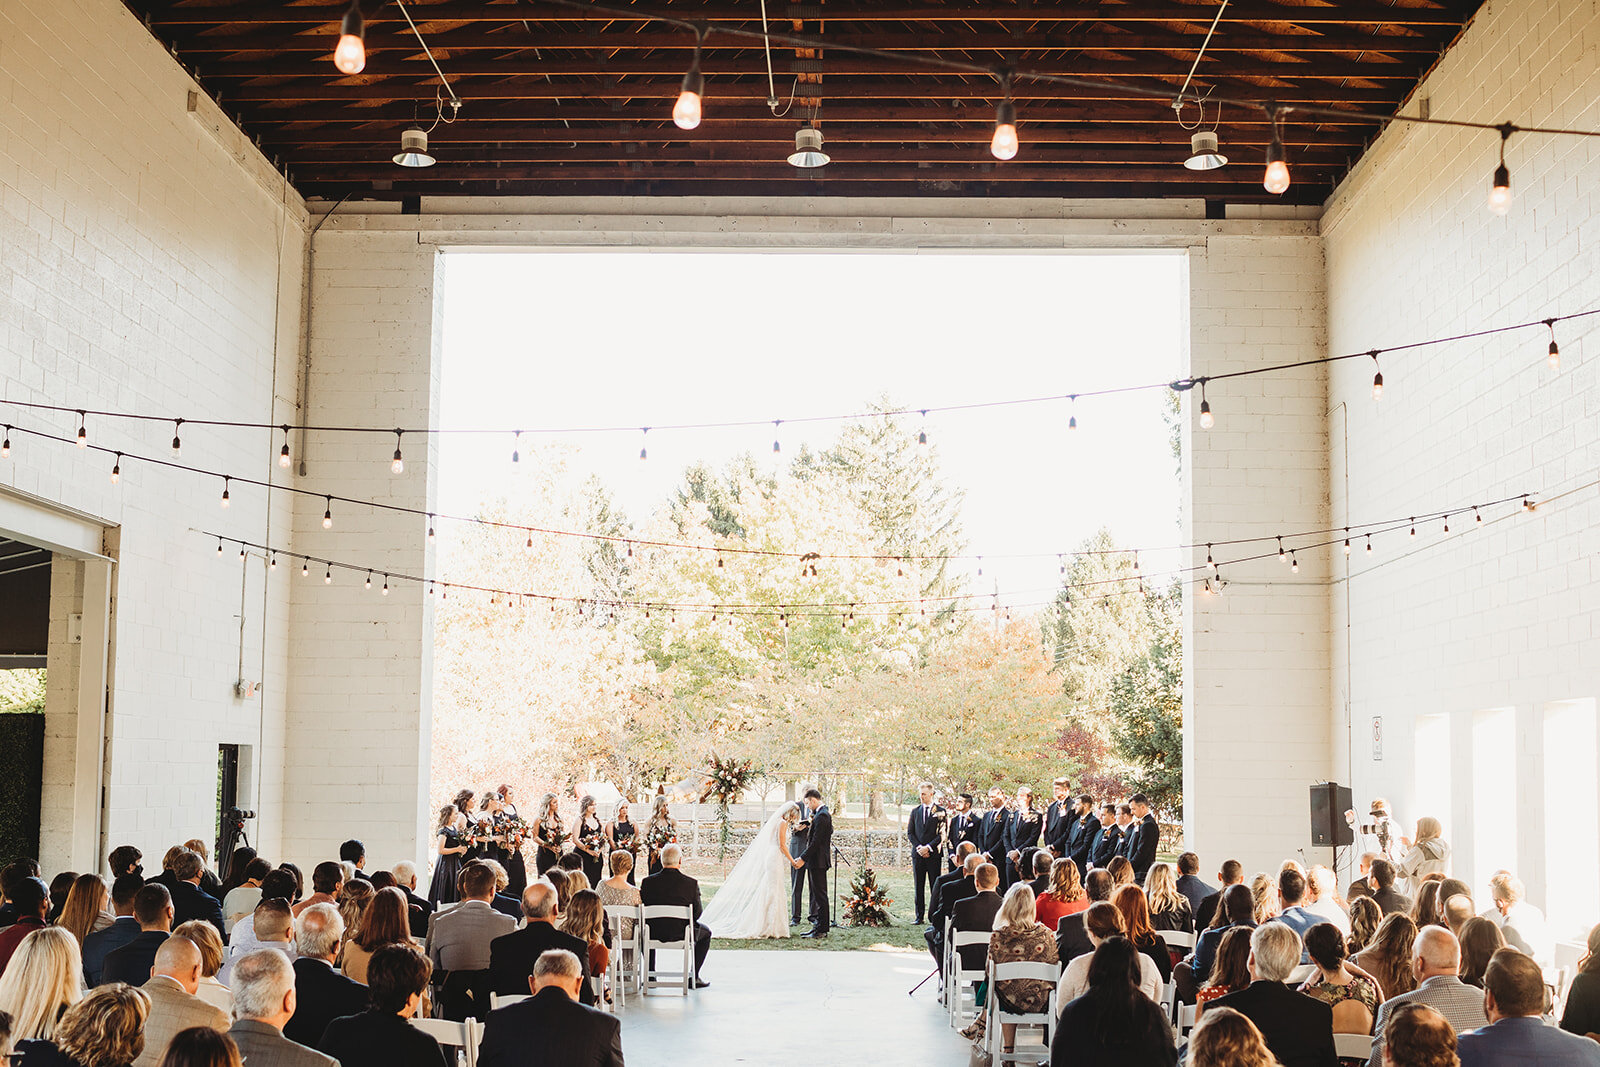 When their original venue closed due to covid, Rachel and Adam lucked out with Pittsburgh venue, Riverfront Weddings when they had an opening available on their wedding date. Photographed by Ryan Zarichnak and planned by Madeline Kelly Events.